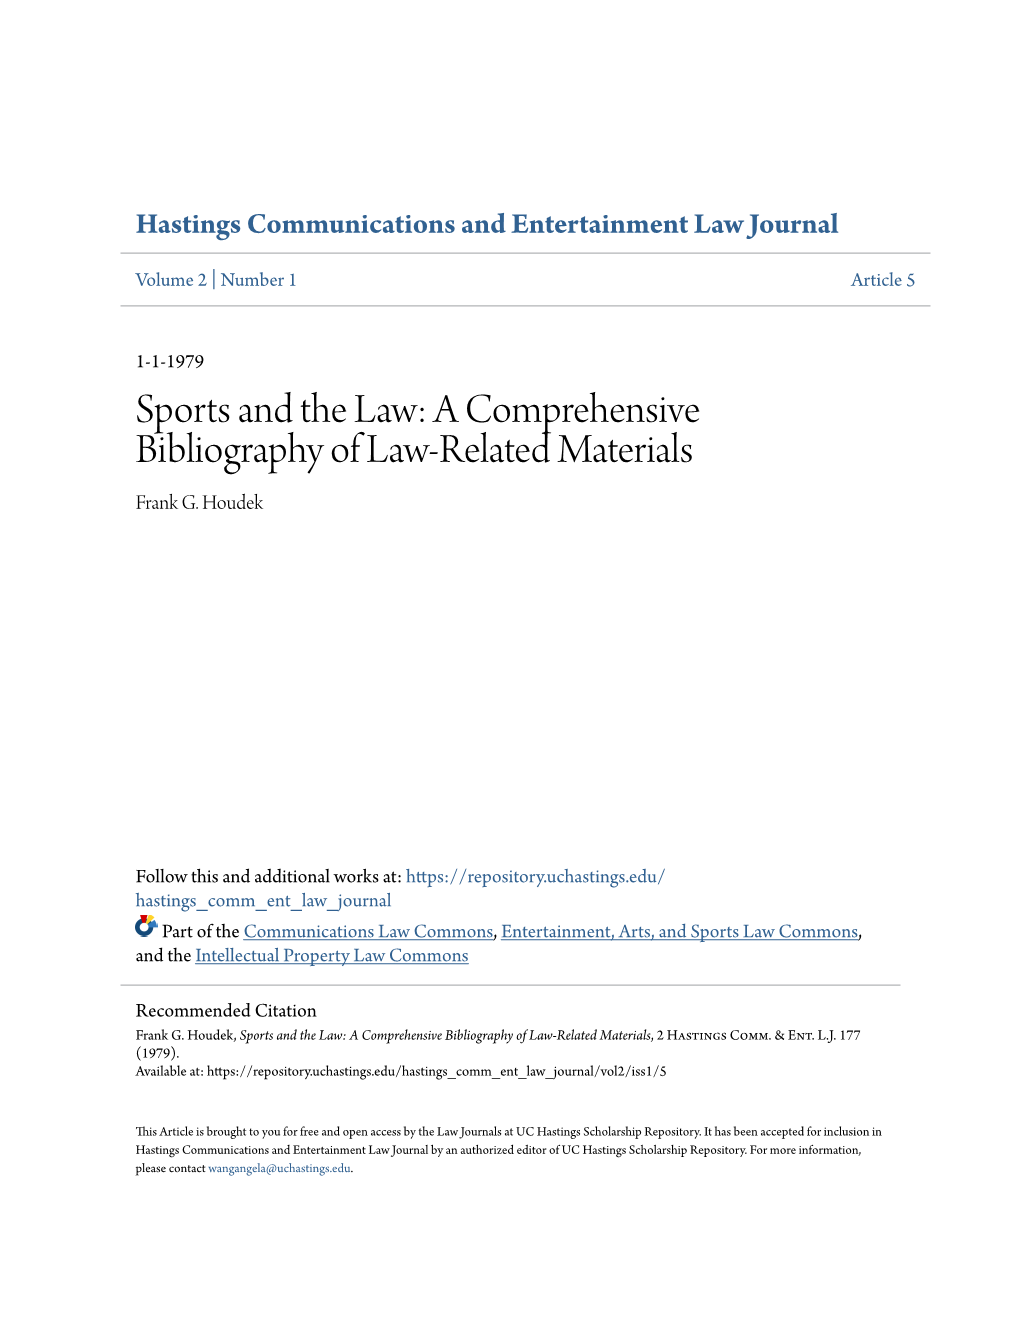 Sports and the Law: a Comprehensive Bibliography of Law-Related Materials Frank G